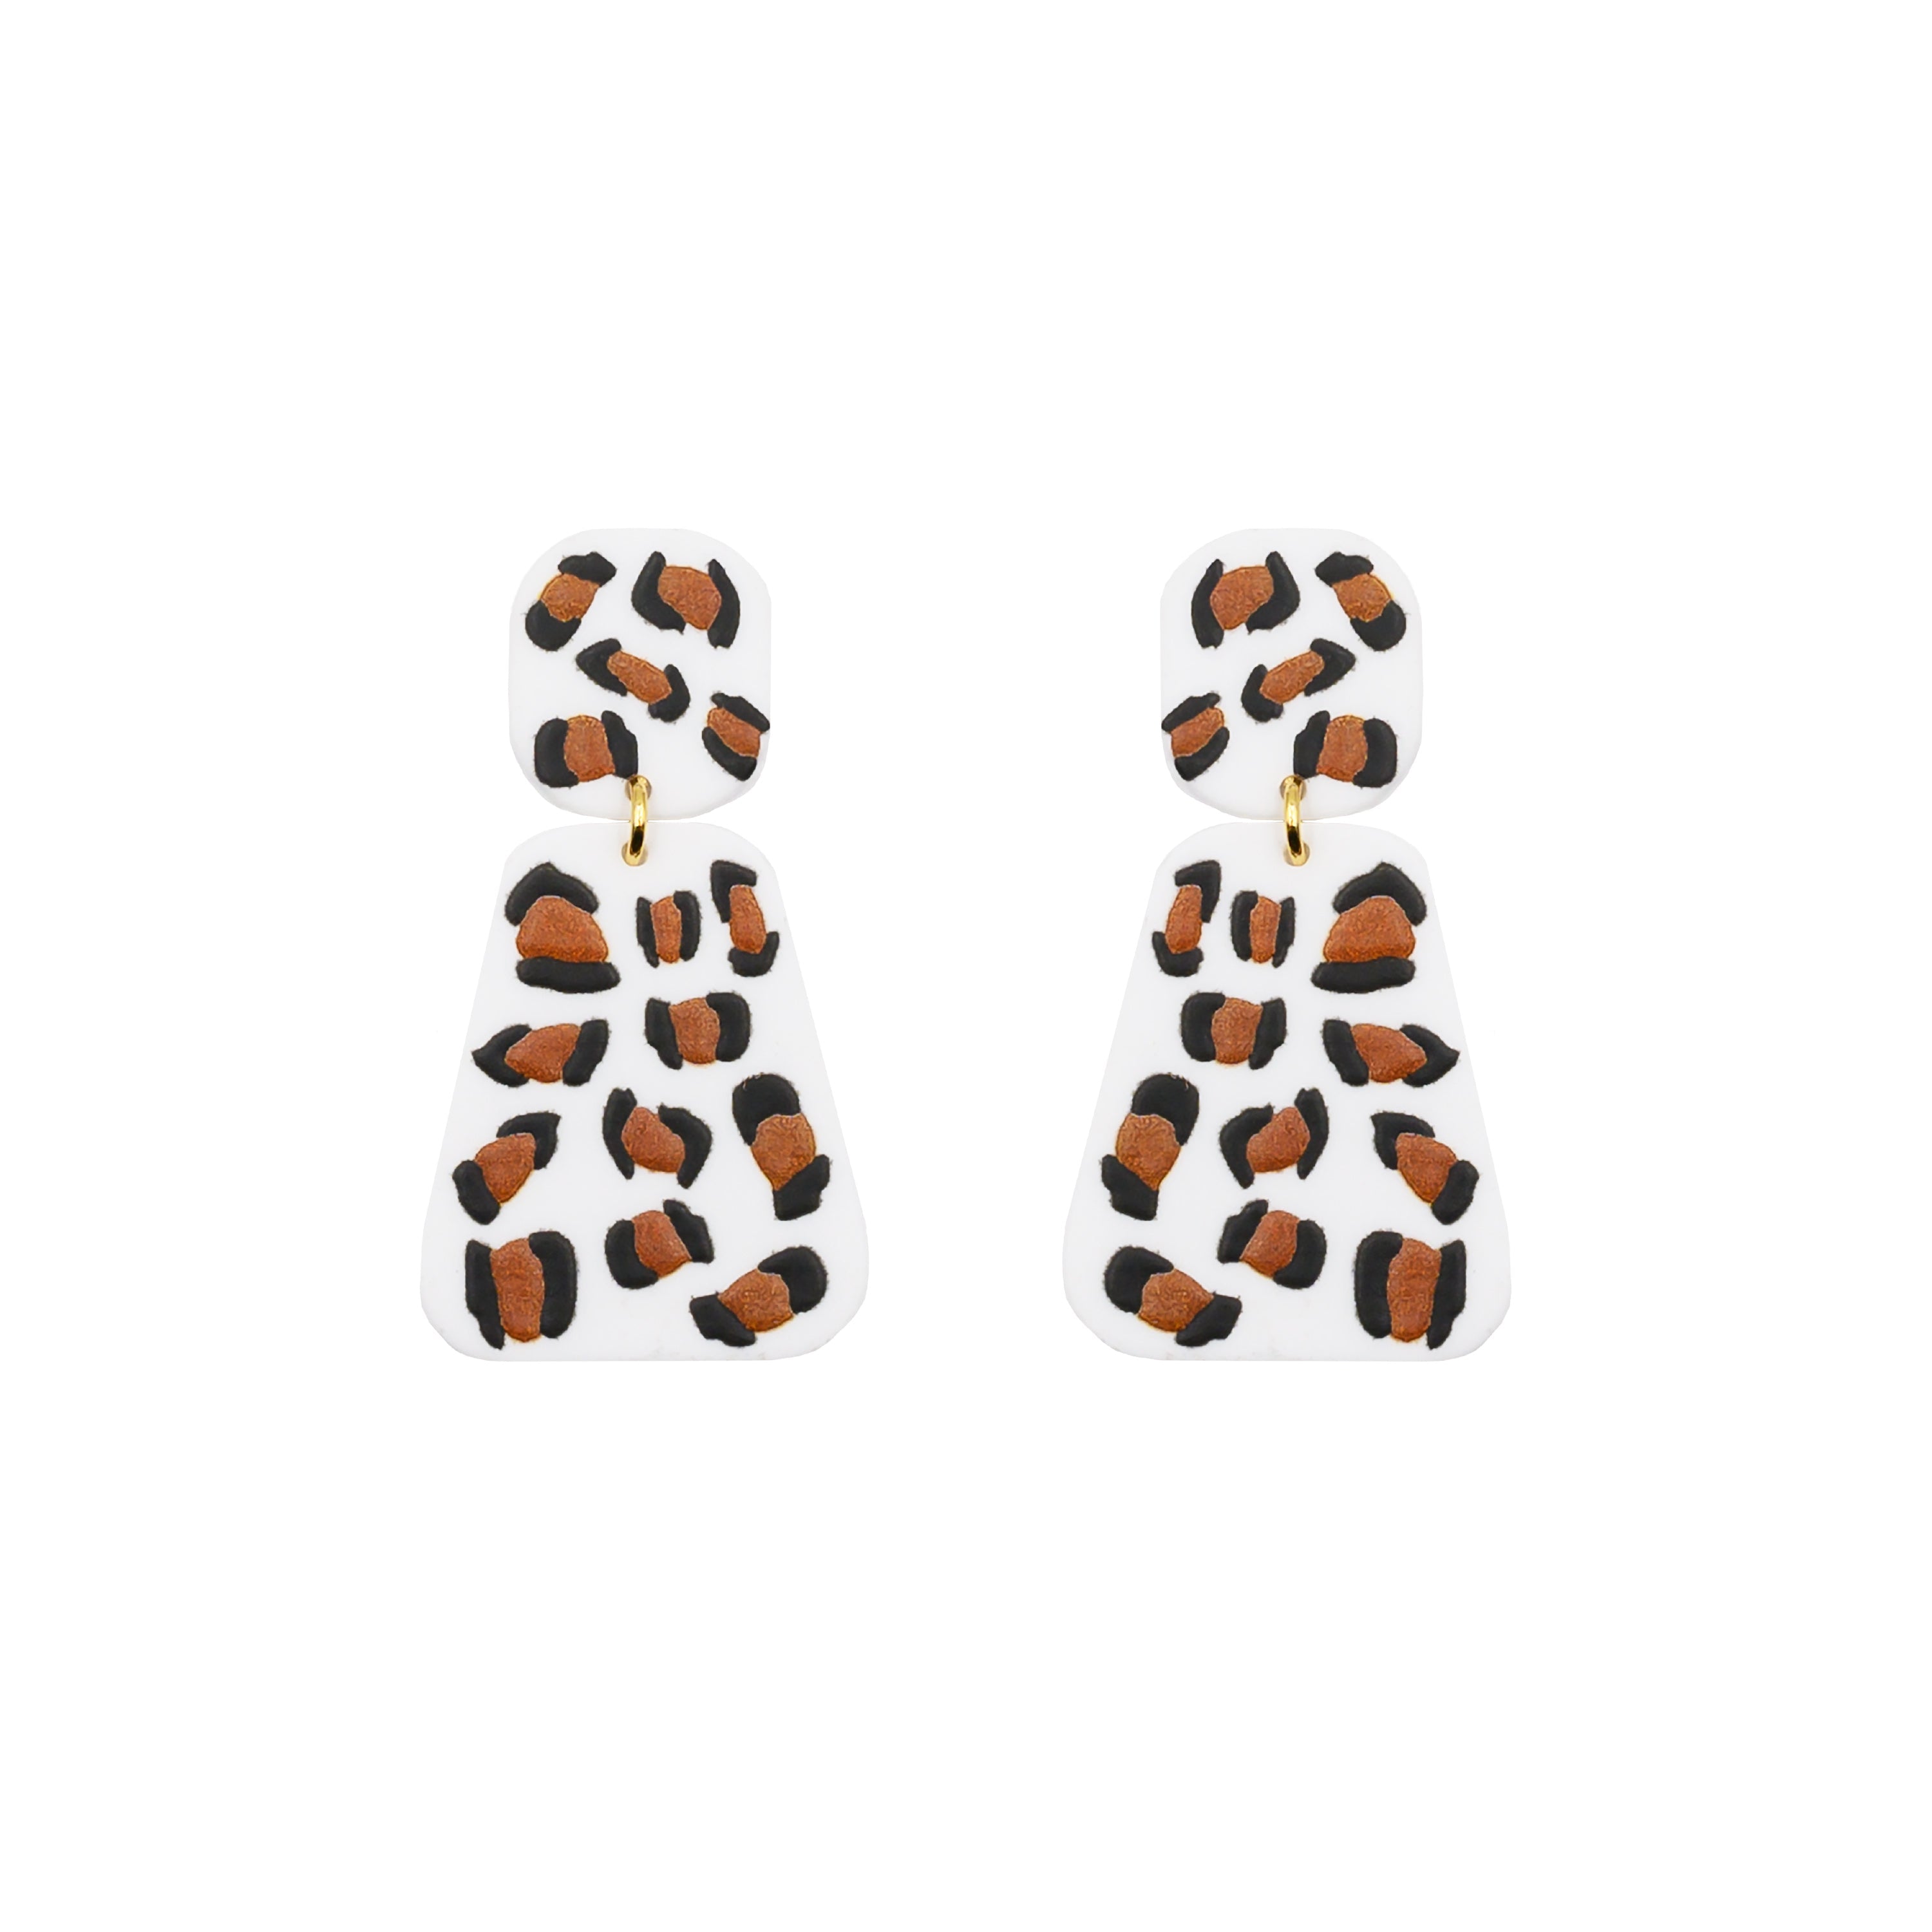 Rave Collection - Kamilah Earrings fine designer jewelry for men and women